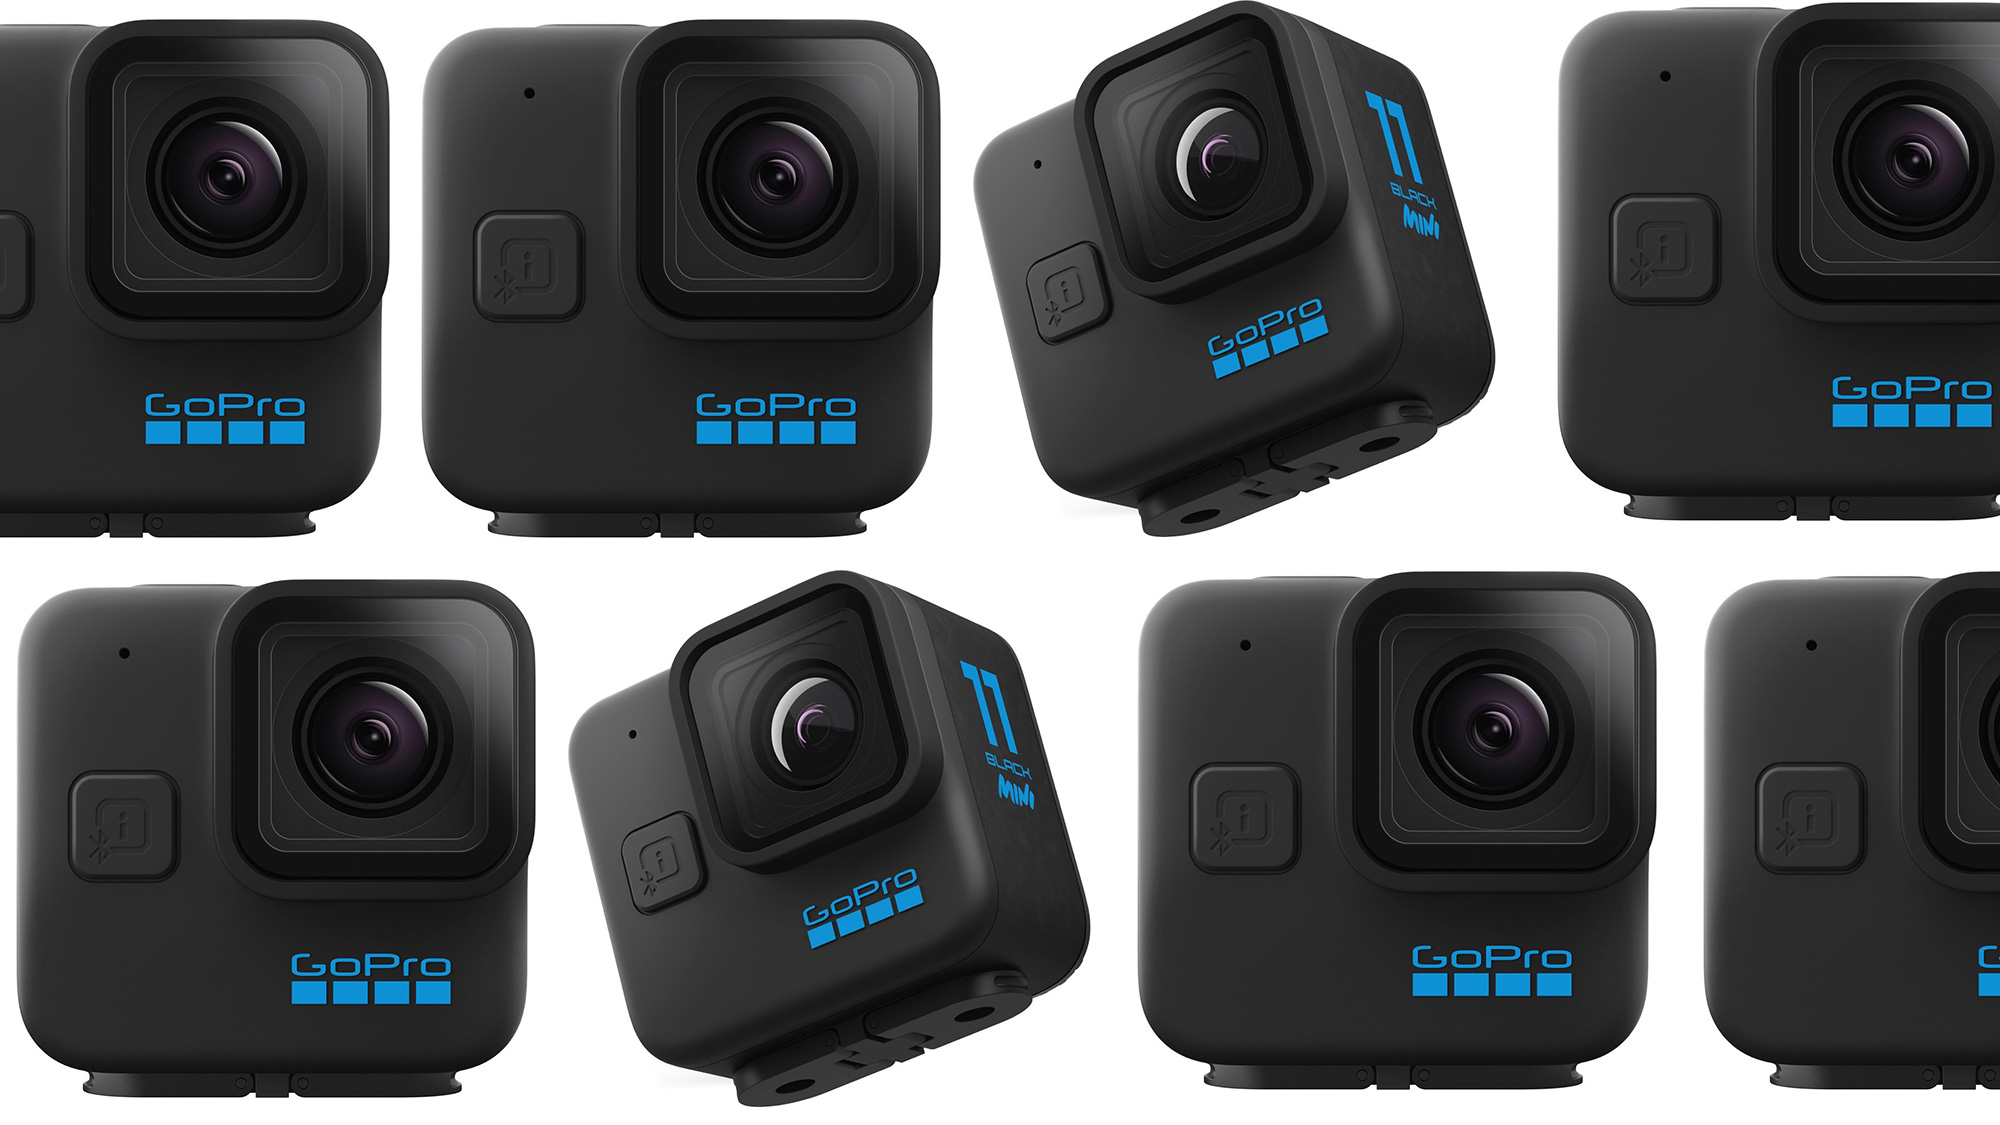 Get the GoPro Hero11 Mini Black for just $200 right now at Amazon